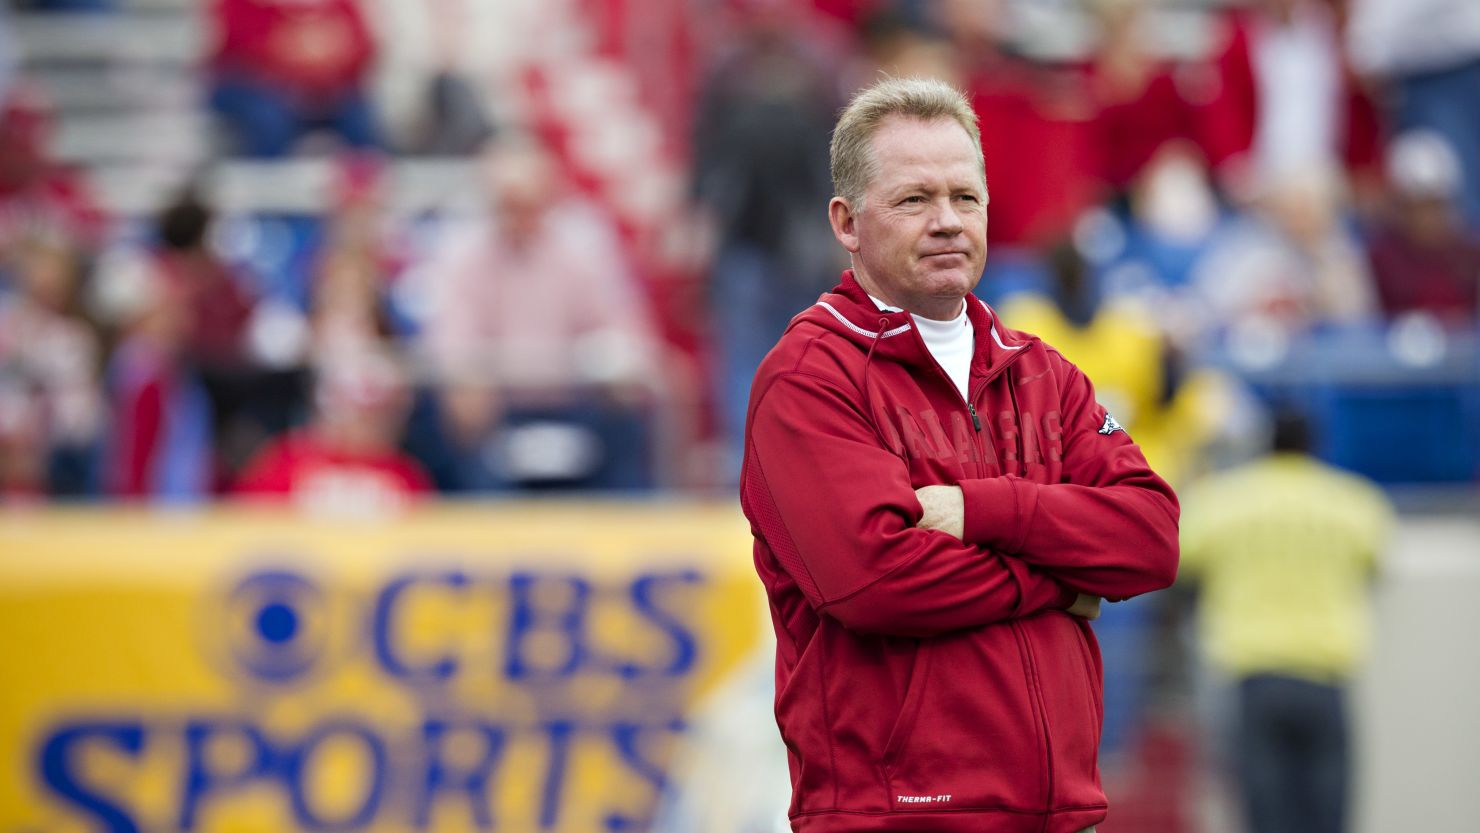 Bobby Petrino was named head coach at Western Kentucky, months after being embroiled in scandal at University of Arkansas